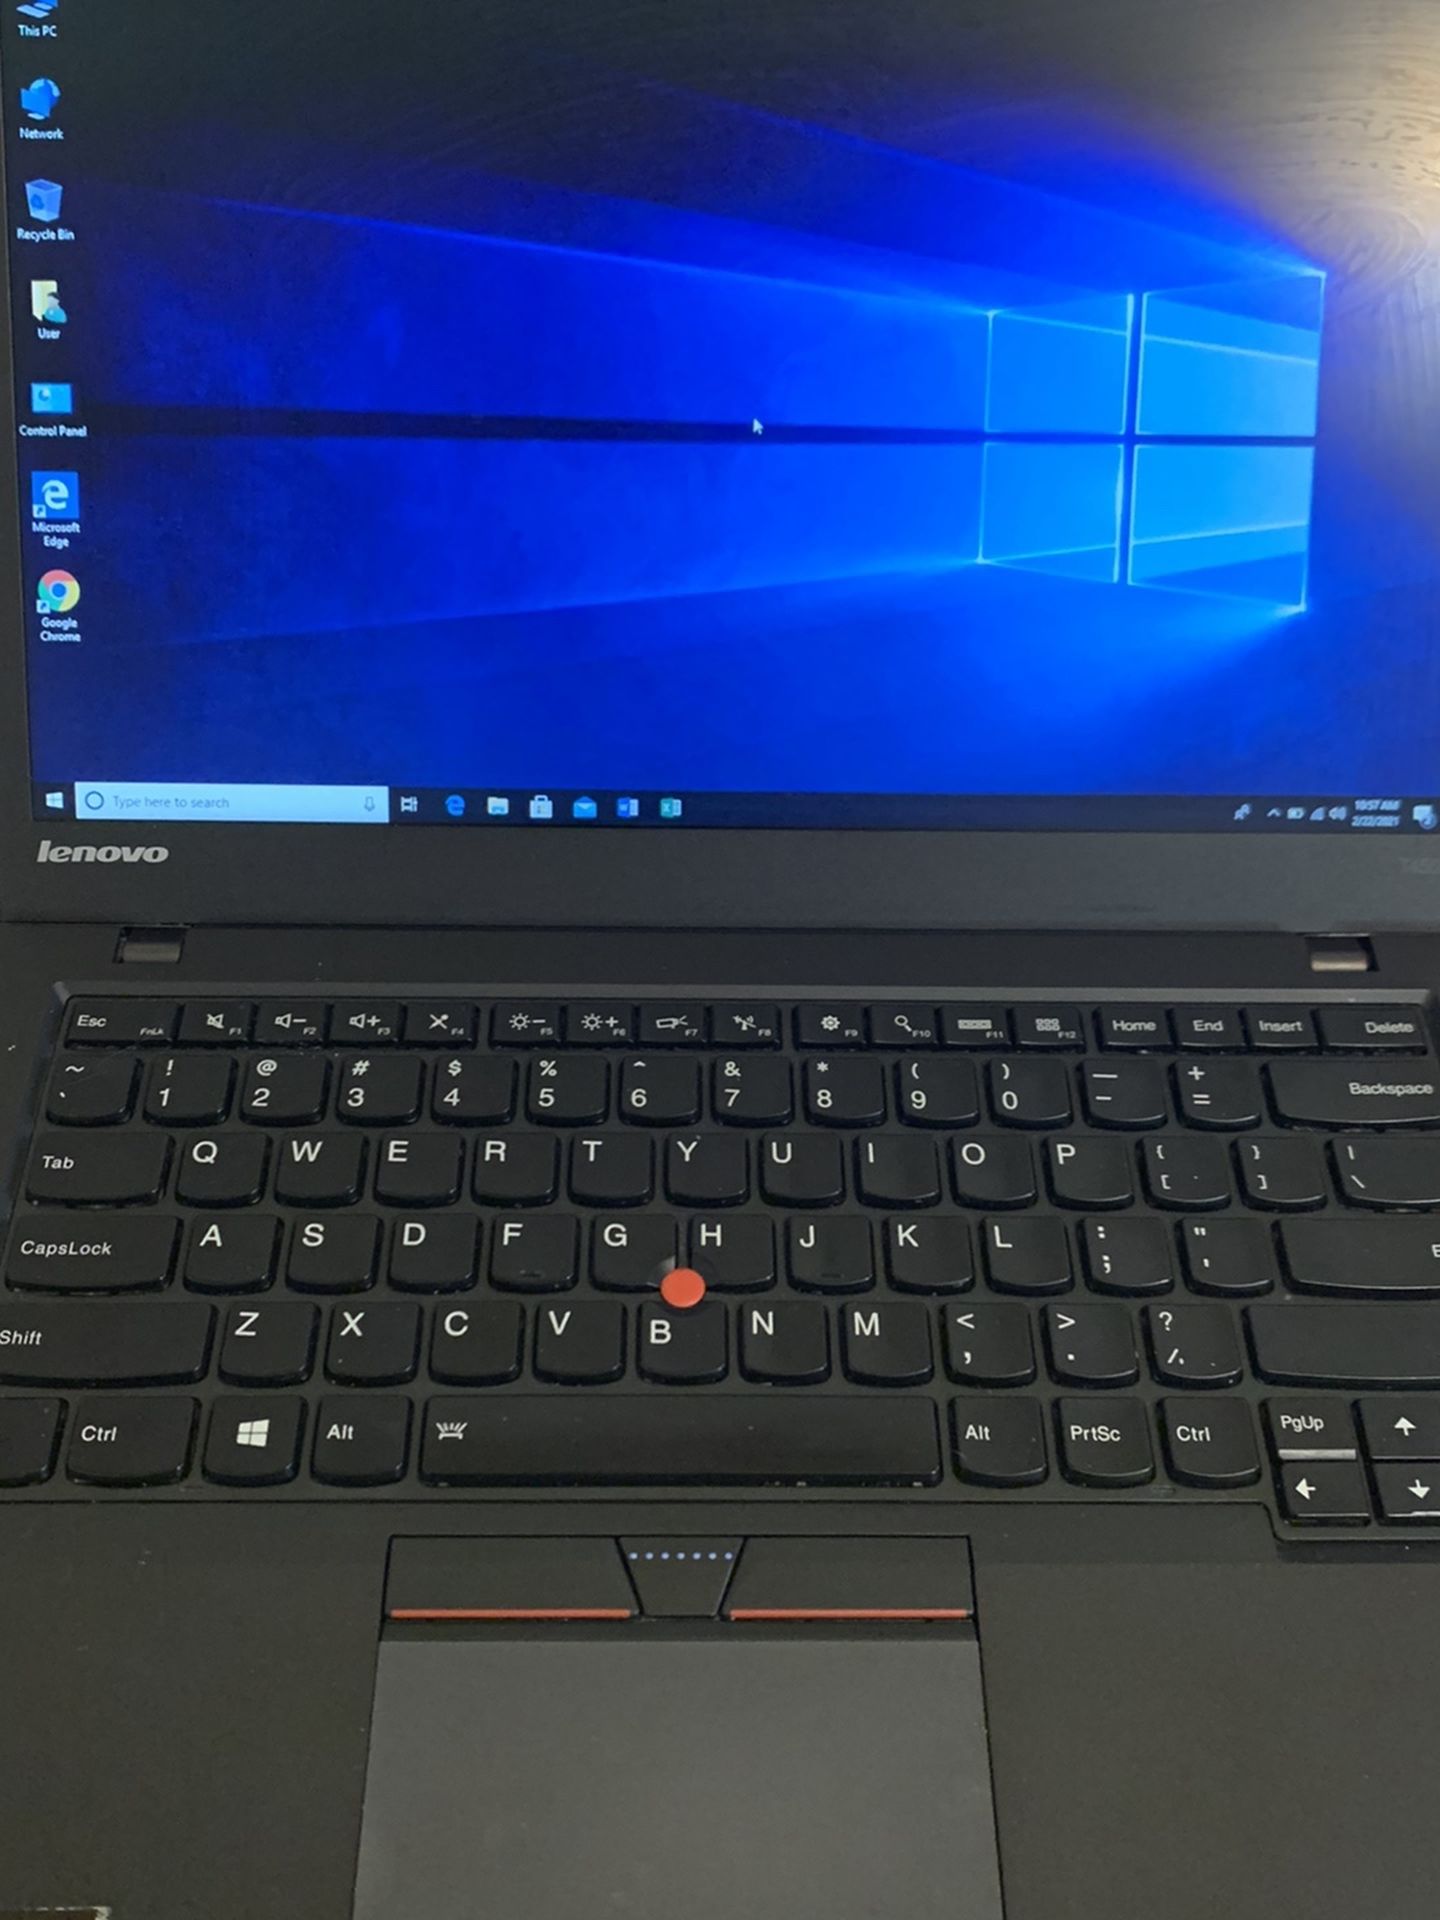 “LENOVO T450spowerful laptop Intel core (TM) i5-4600U CPU @ 2.10 GHz 2.69 GHz , 8 GB RAM,256 SSD with fully installed/ licensed Windows 10 and packag